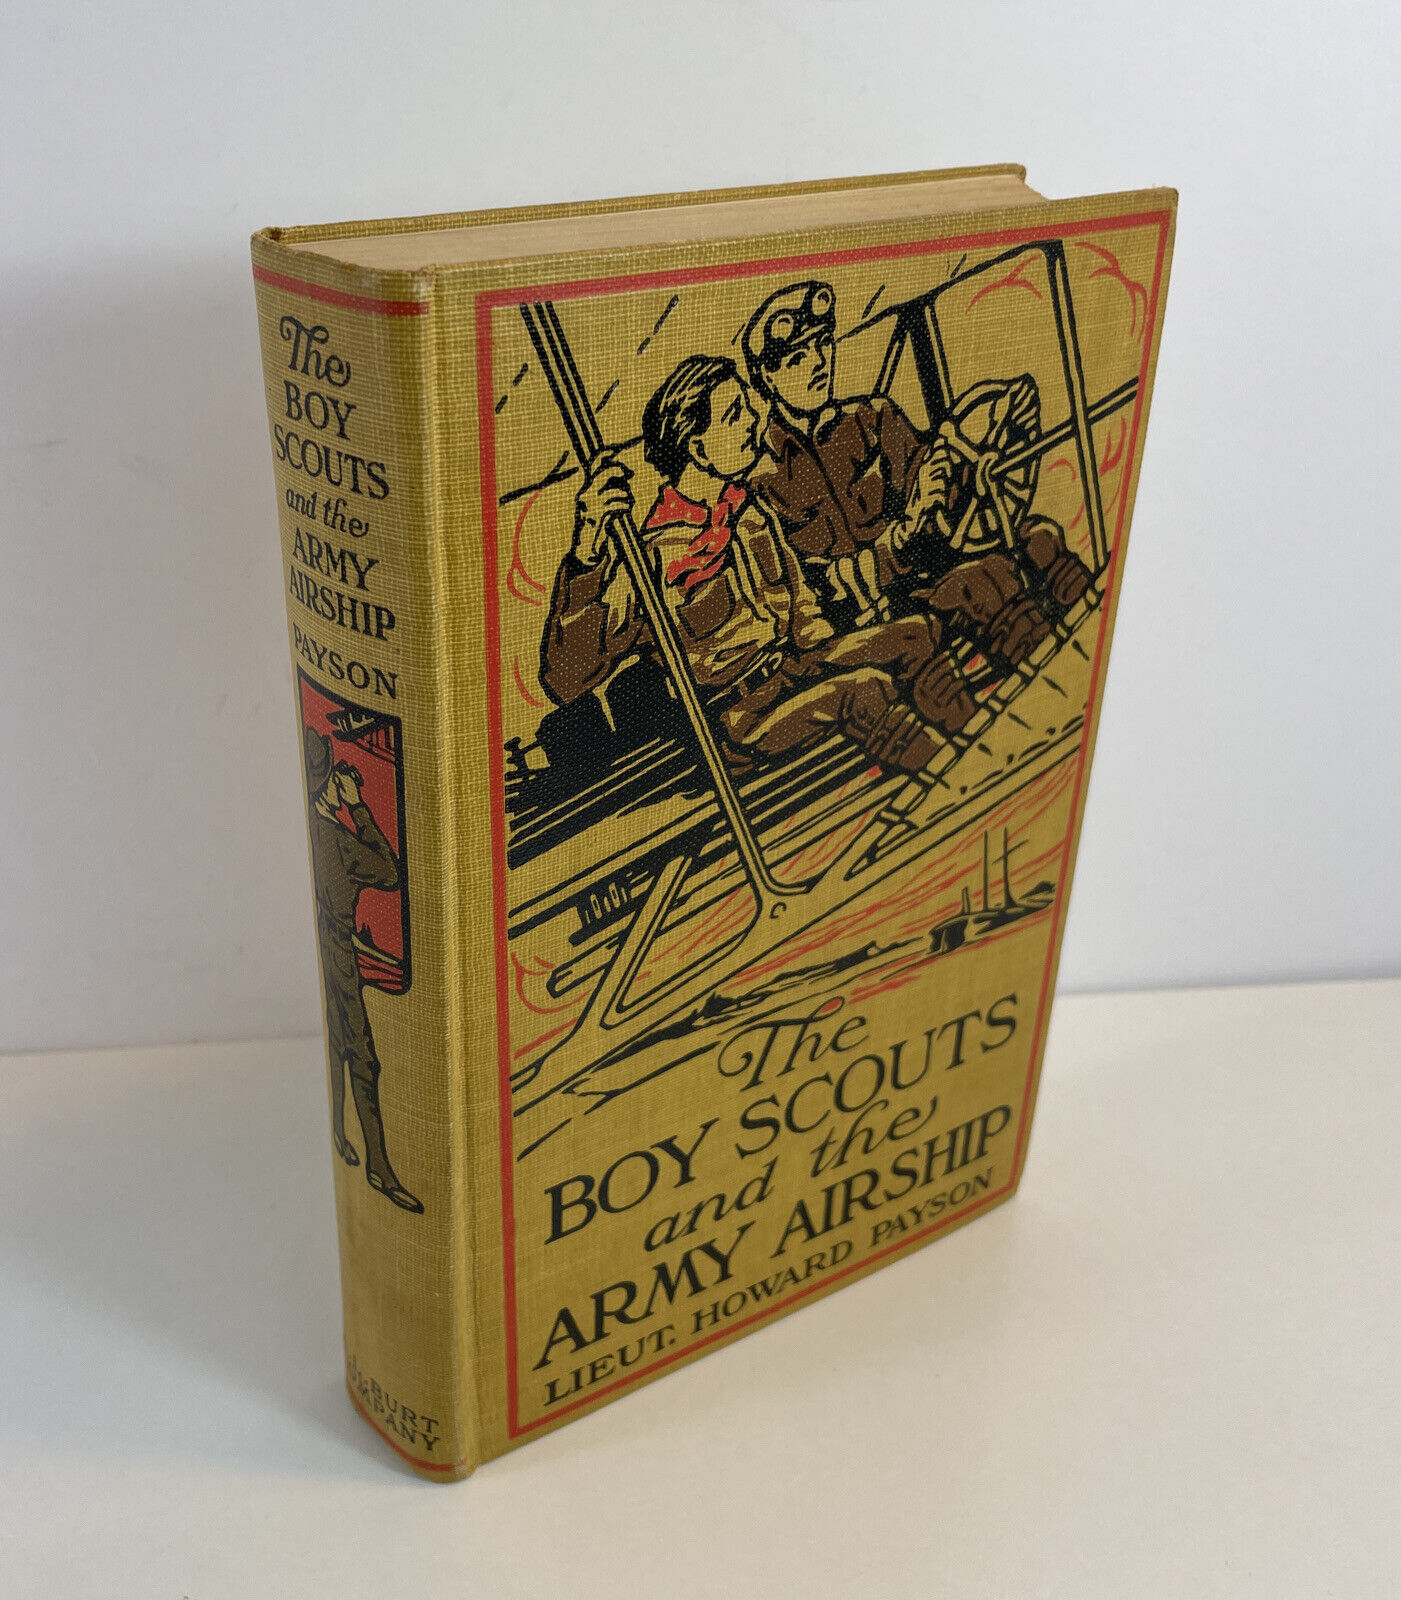 1911 BOY SCOUT FICTION BOOK - BOY SCOUTS AND THE ARMY AIRSHIP Payson Hardcover